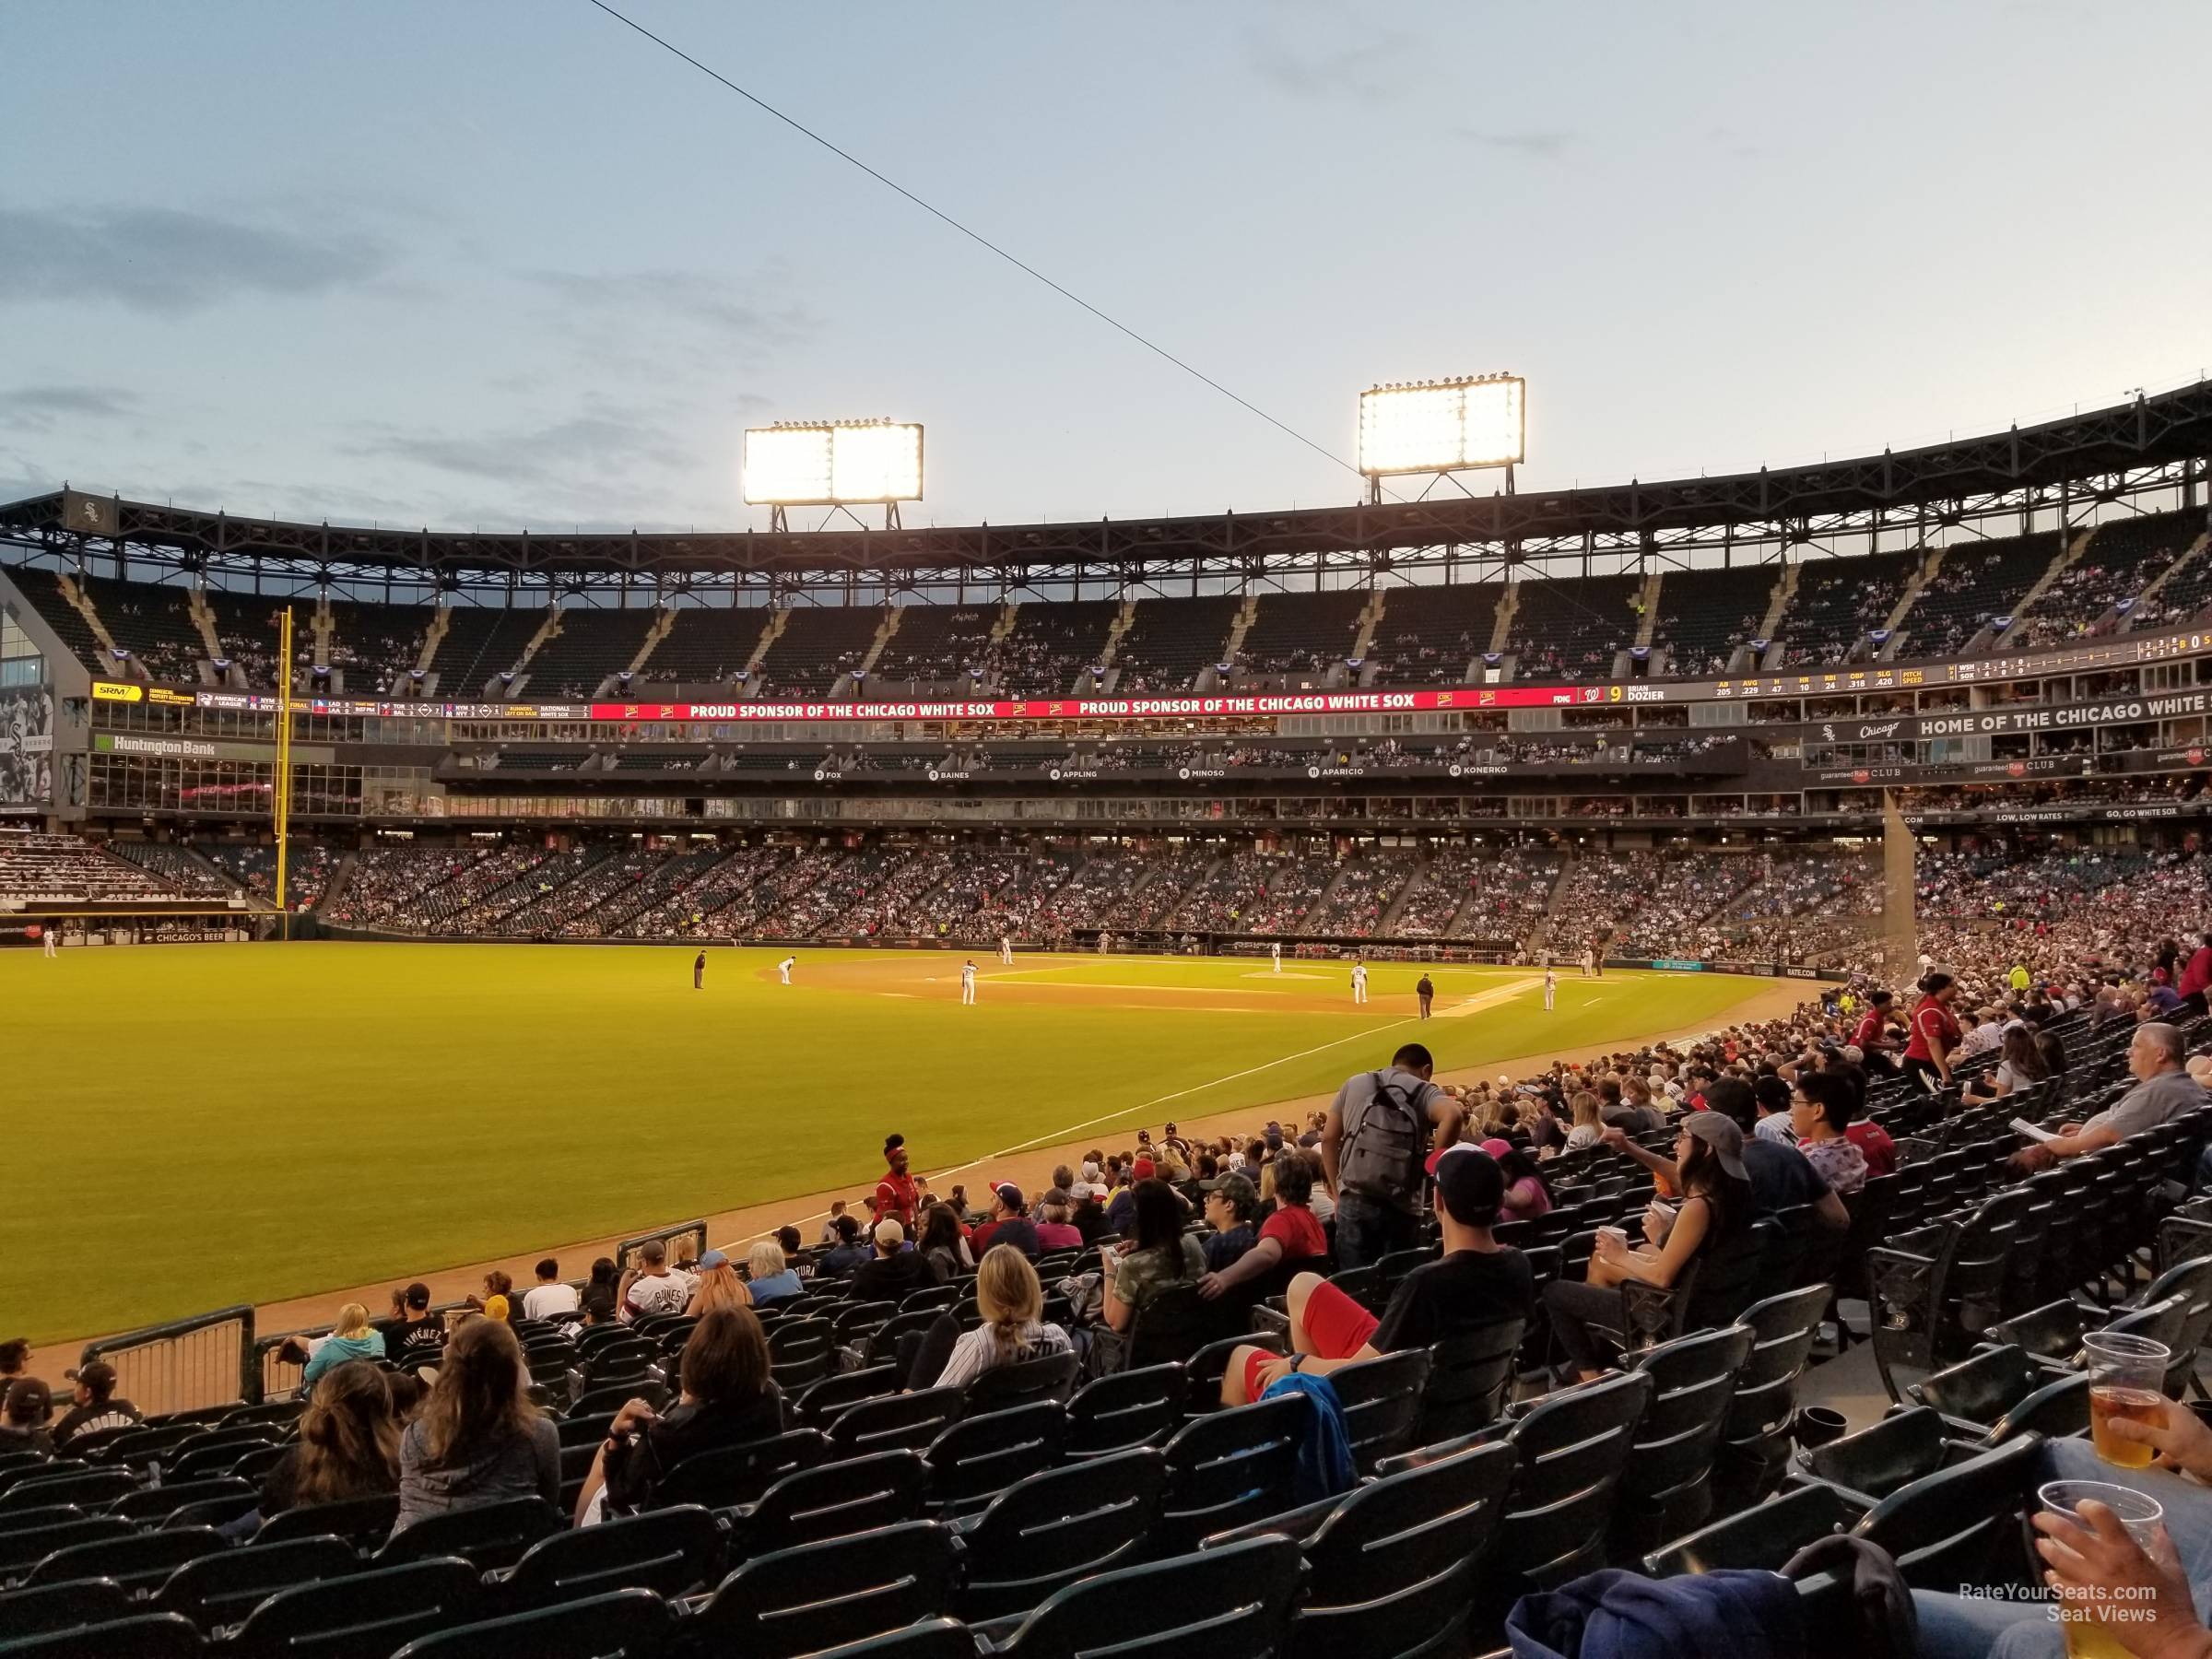 section 154, row 20 seat view  - guaranteed rate field